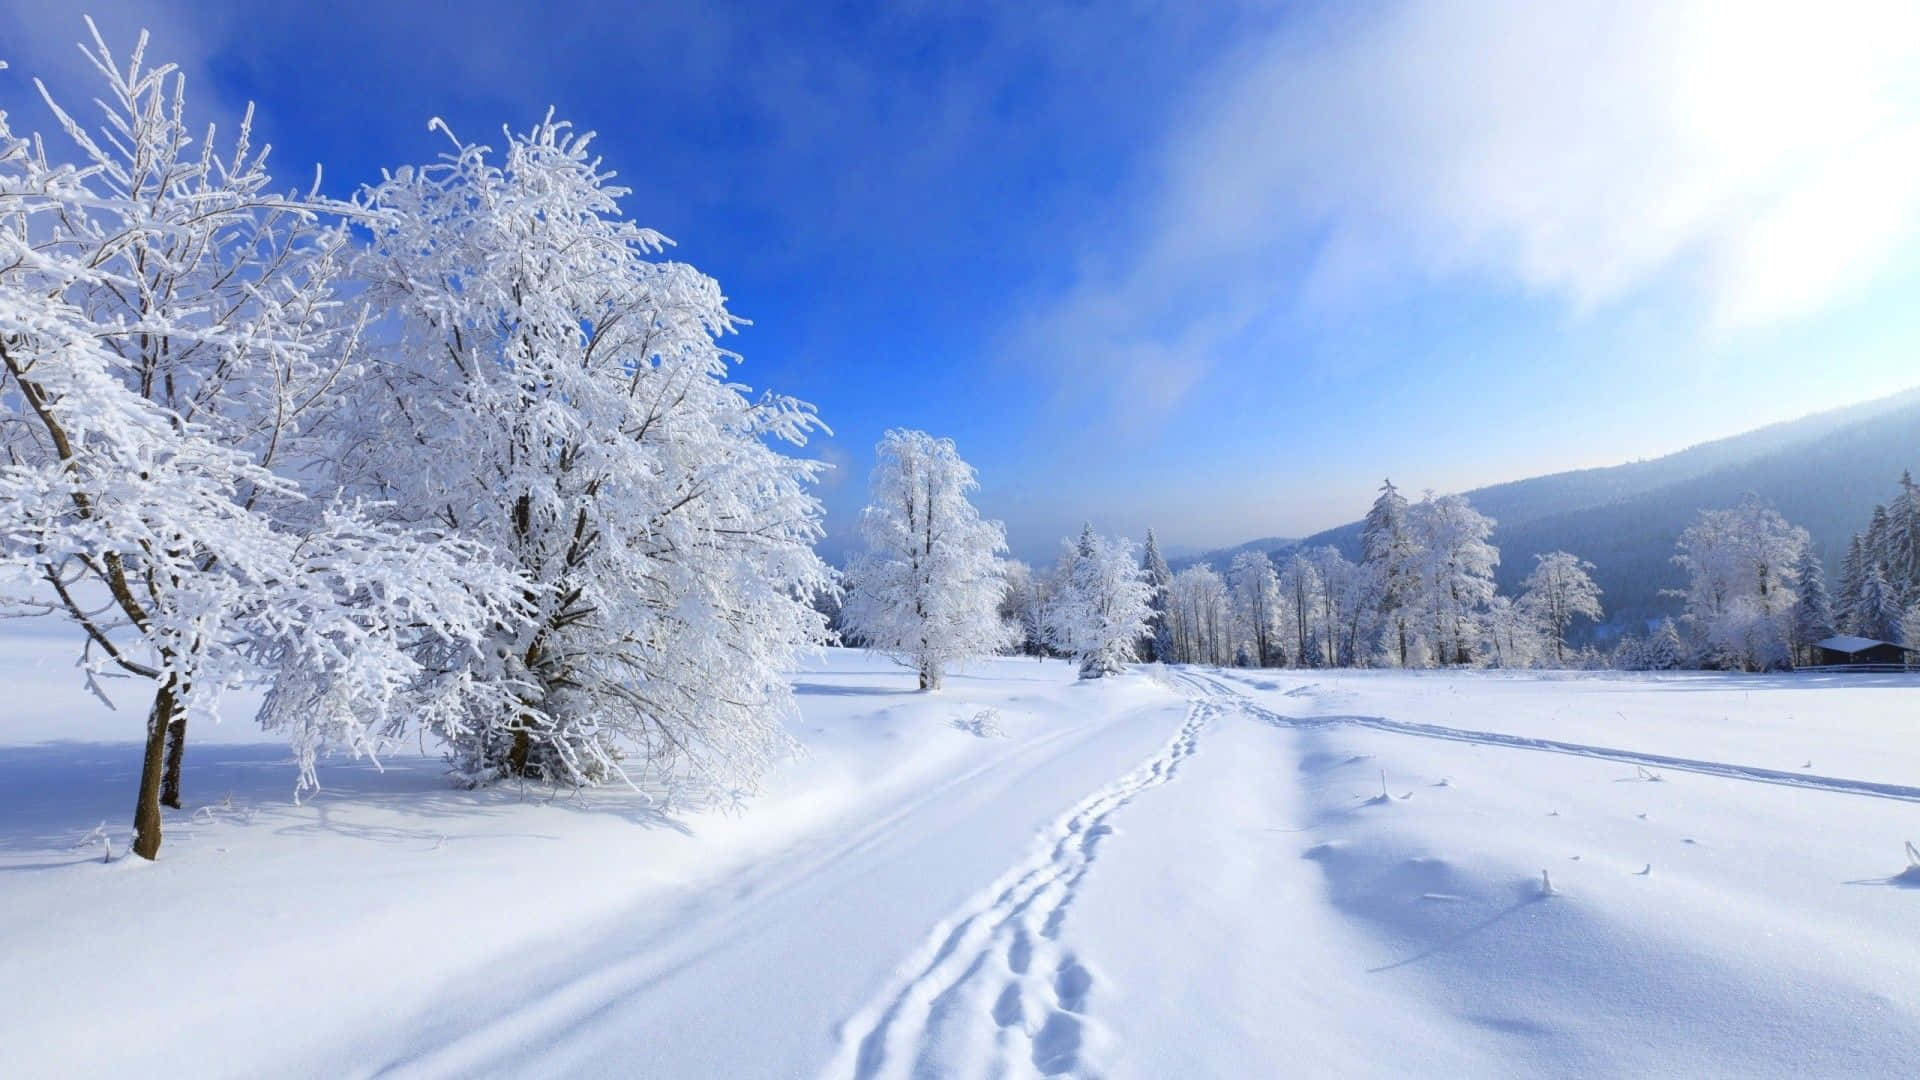 Winter Wallpapers Full HD Group 1920×1080 Winter Screen Wallpapers